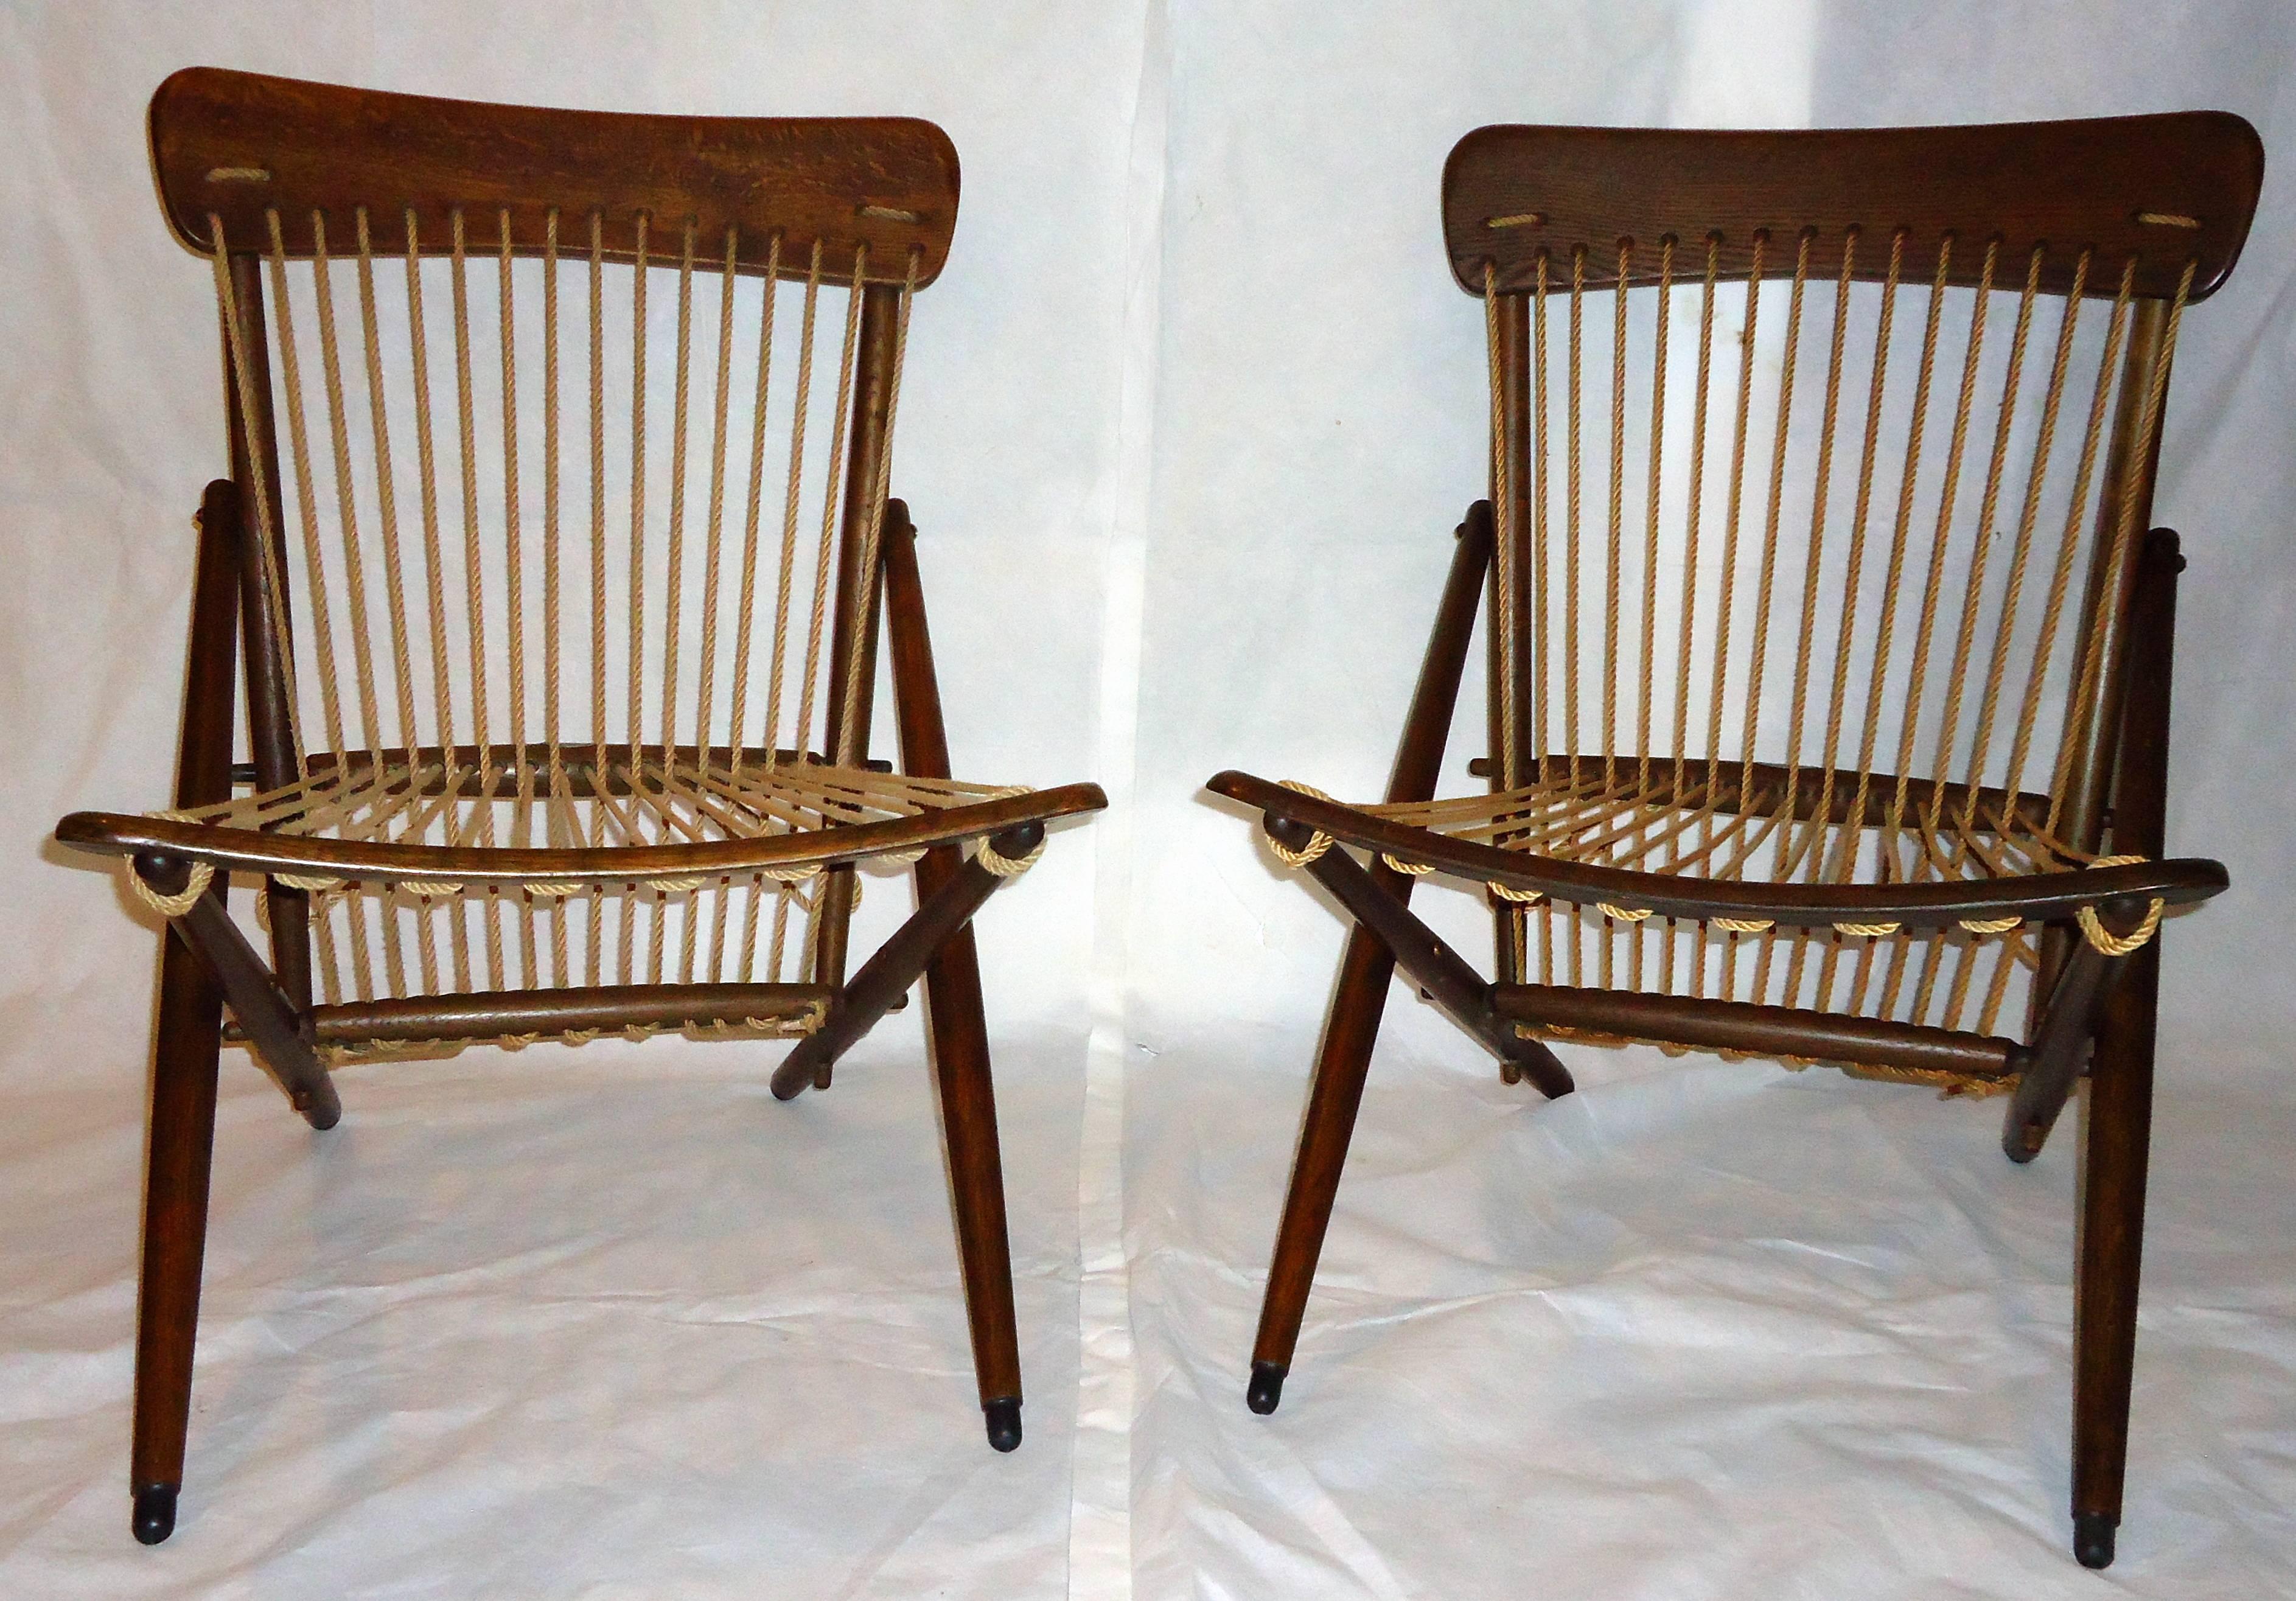 Extraordinarily rare pair of pre-1950 hand-carved oak and rope lounge chairs from the Maruni studio of Hiroshima, Japan. 
The turned oak framed chairs have hand dipped rubber feet, the original rope and the pre-1950 smoked oak finish. 
The chairs